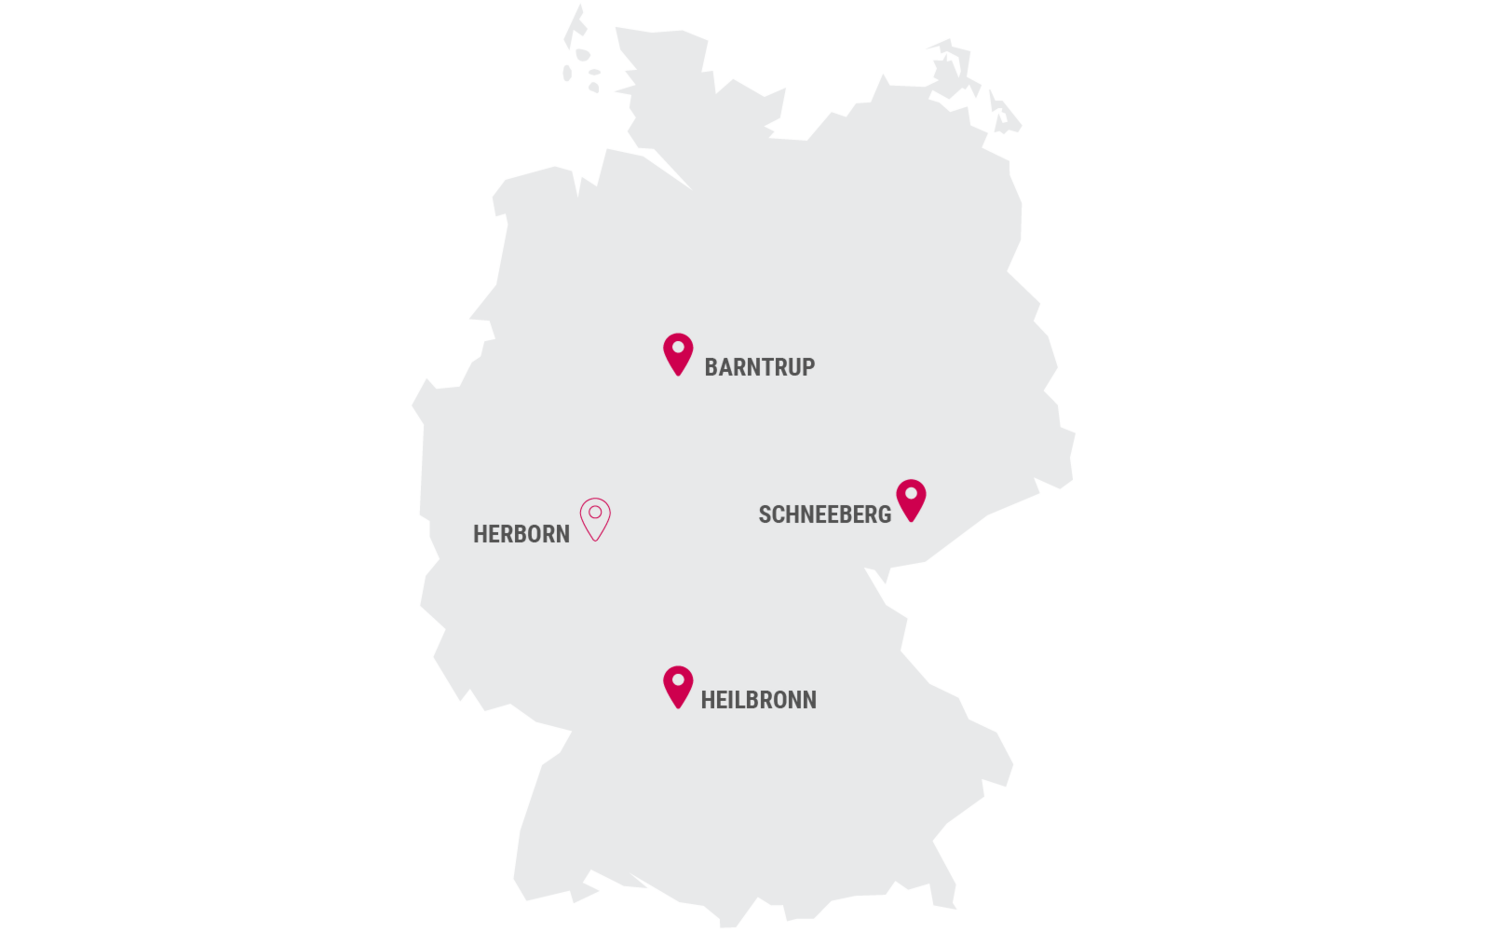 Map of Germany with KEB locations